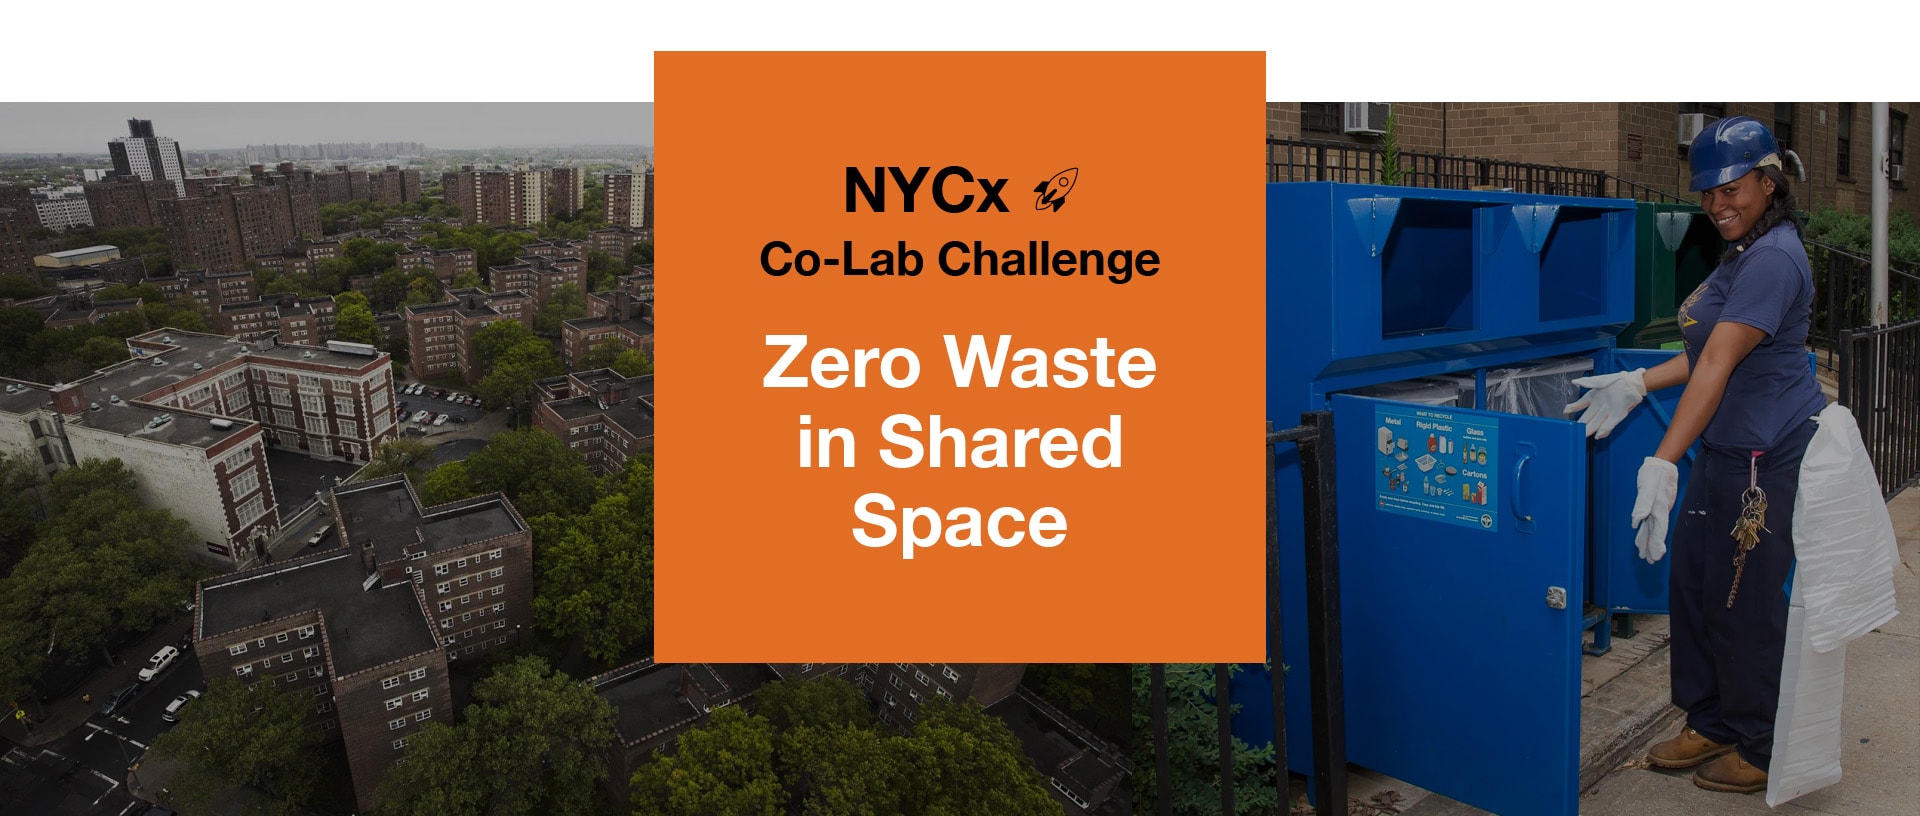 Header Image of aerial view of Brownsville Public Housing and image of Public Housing common space with text in a orange square with text that reads: NYCx Co-Lab Challenge: Zero Waste in Shared Space